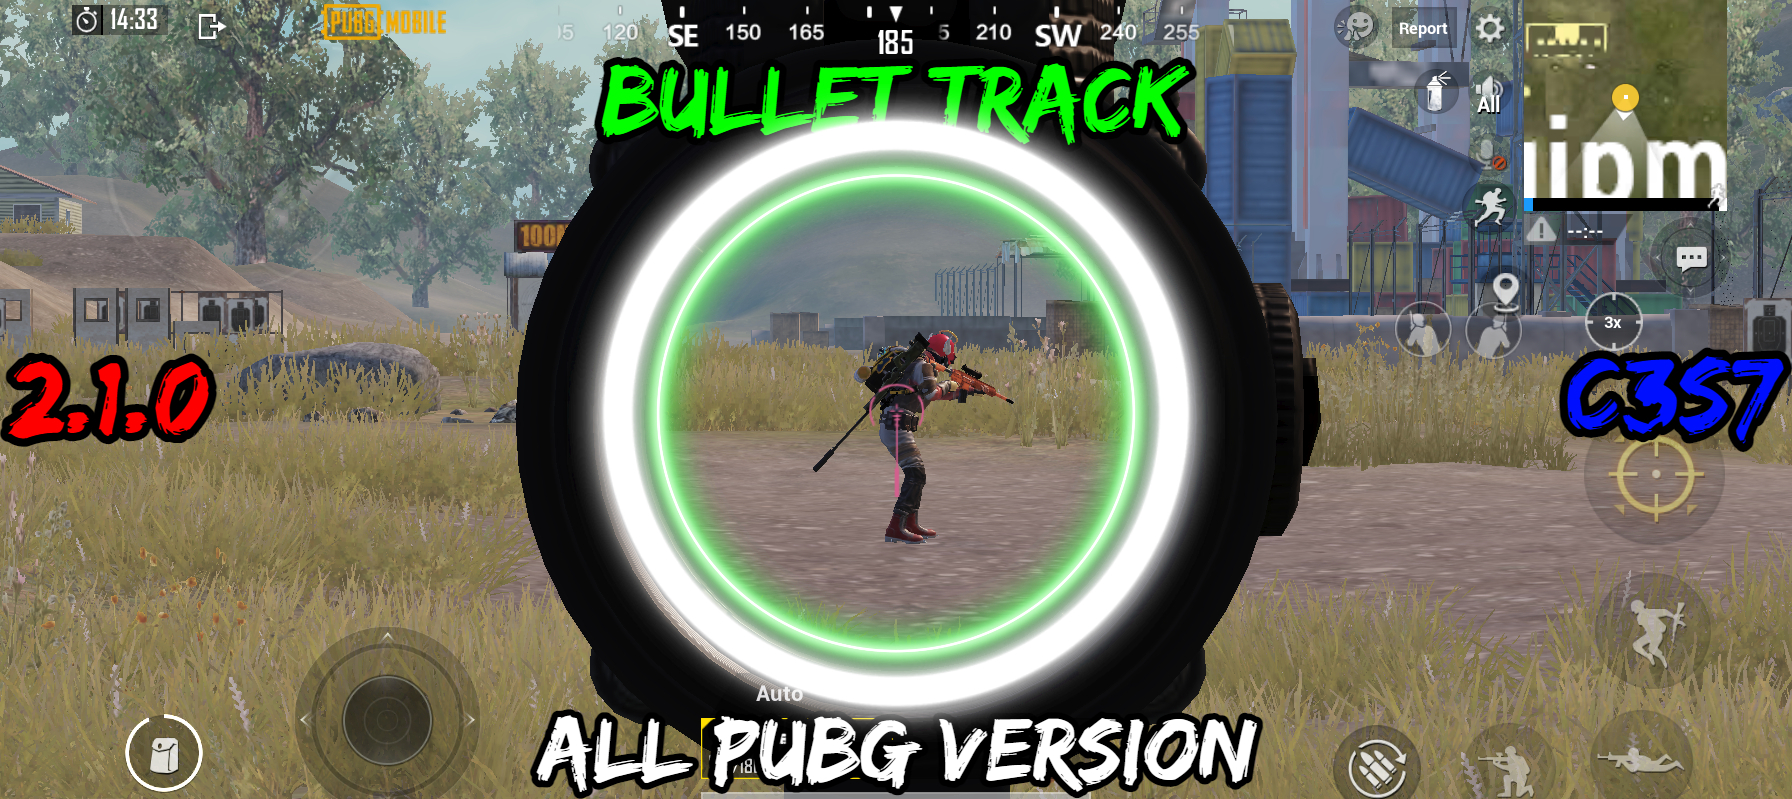 Read more about the article PUBG BGMI 2.1.0 All Version Bullet Tracking Config Hack C3S7